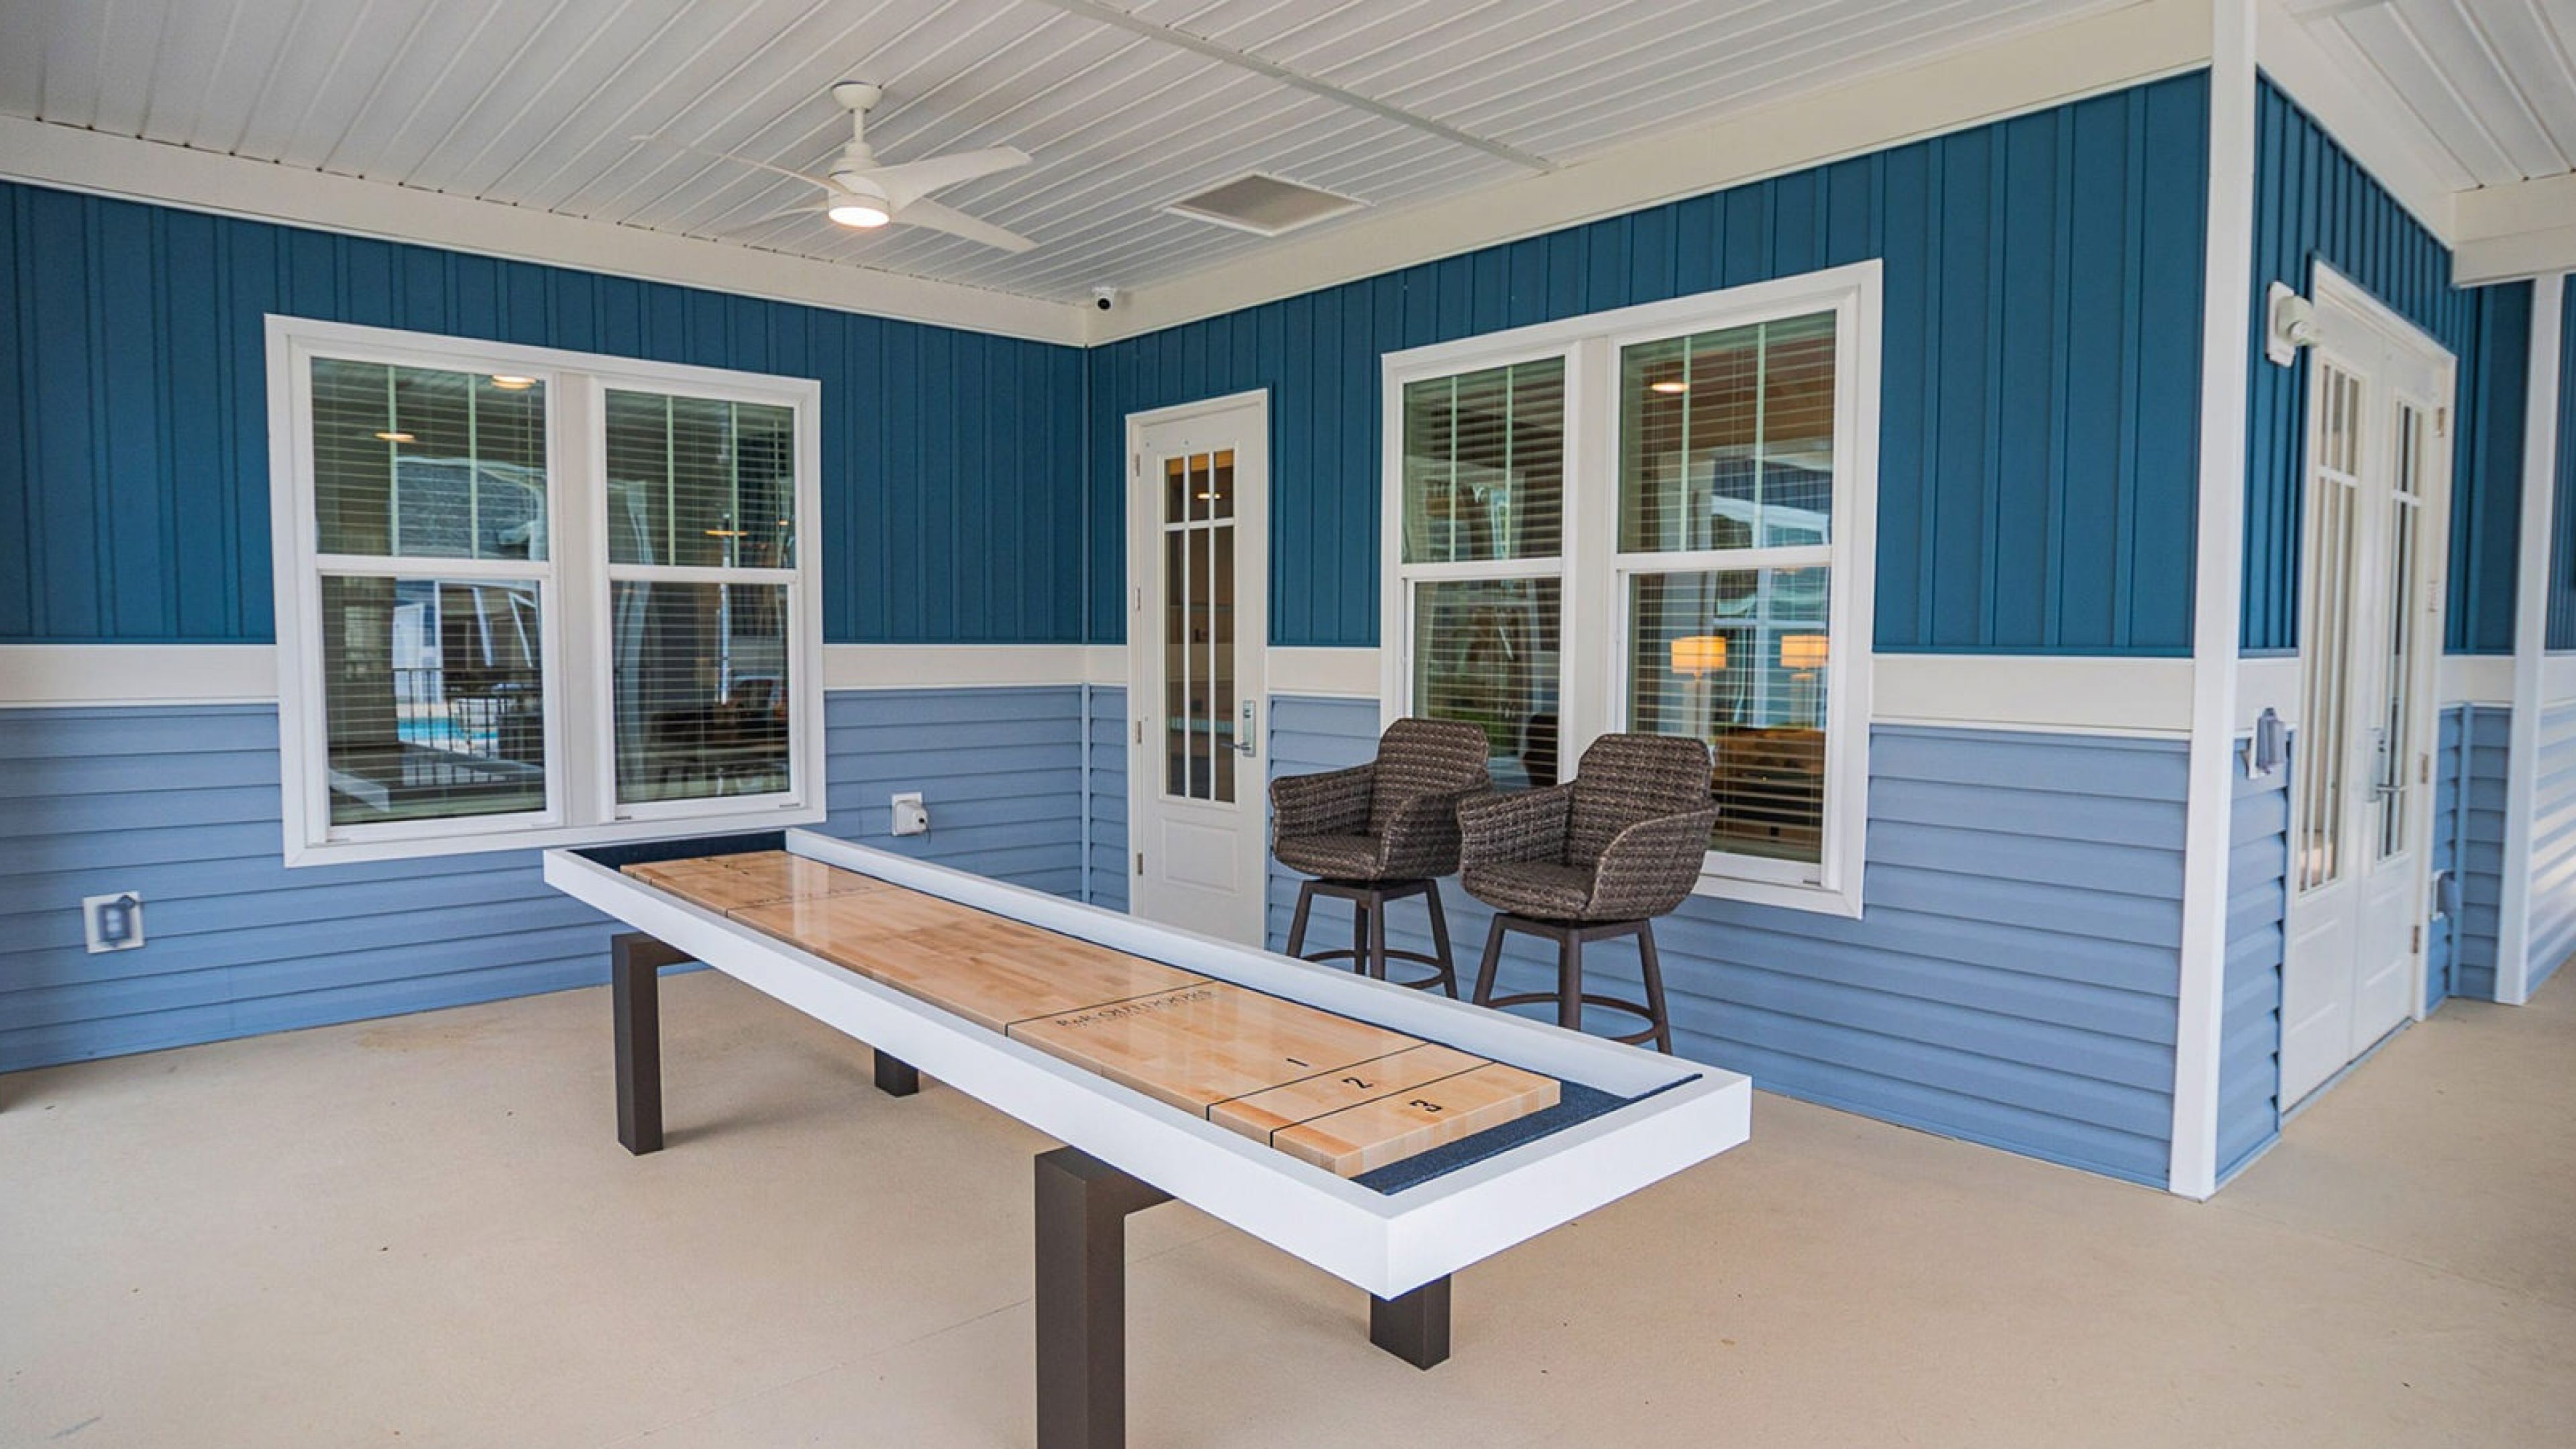 Hawthorne at Pine Forest shuffleboard game located on outdoor porch at Hawthorne Pine Forest